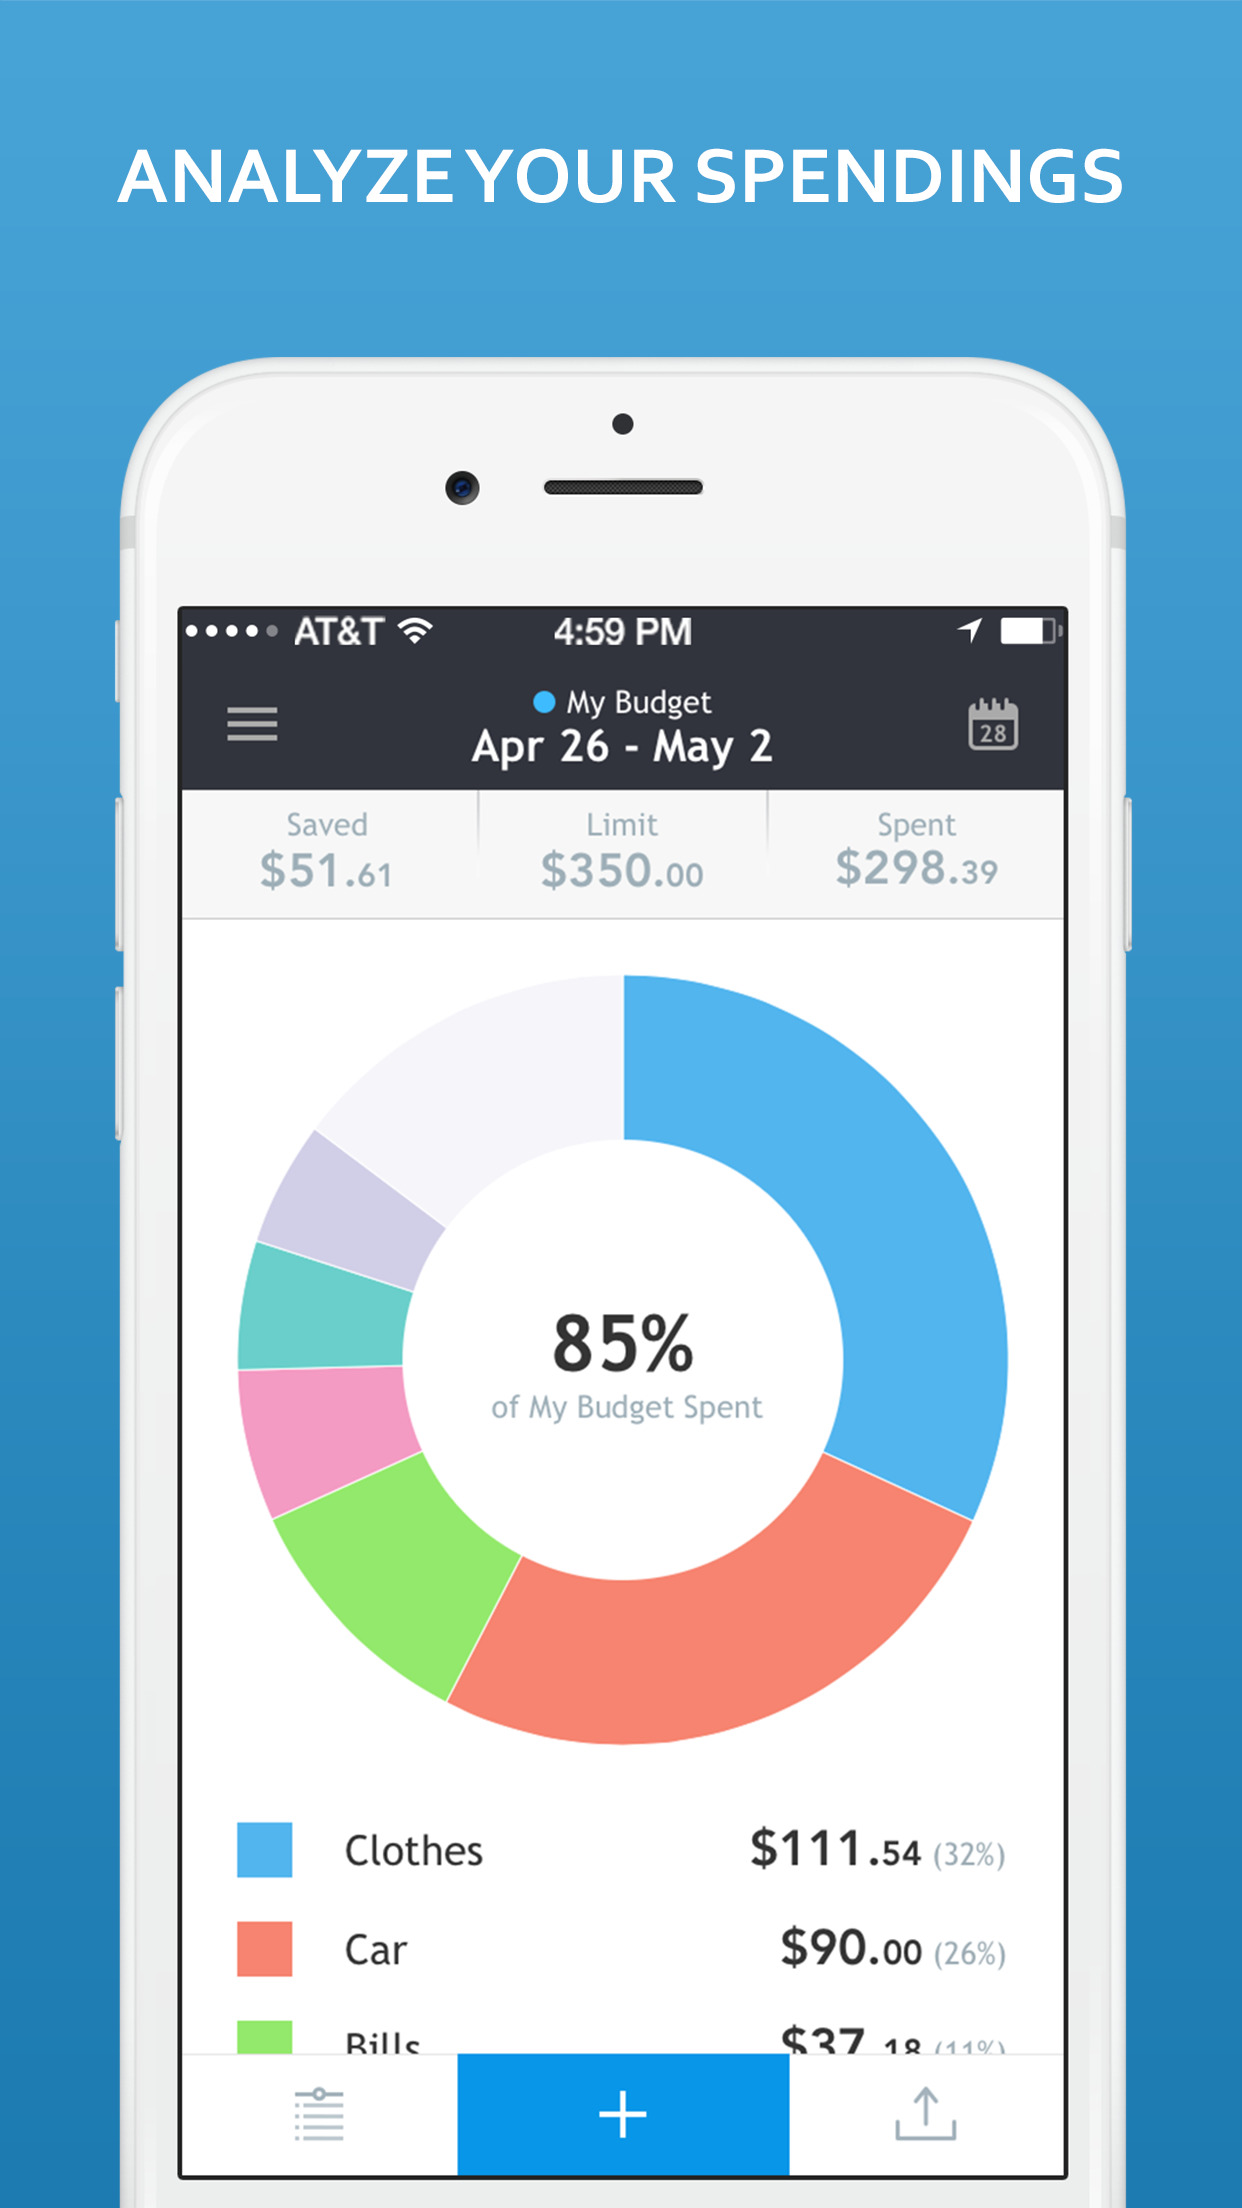 Sumptus – Money Saver and Daily Expense Tracker